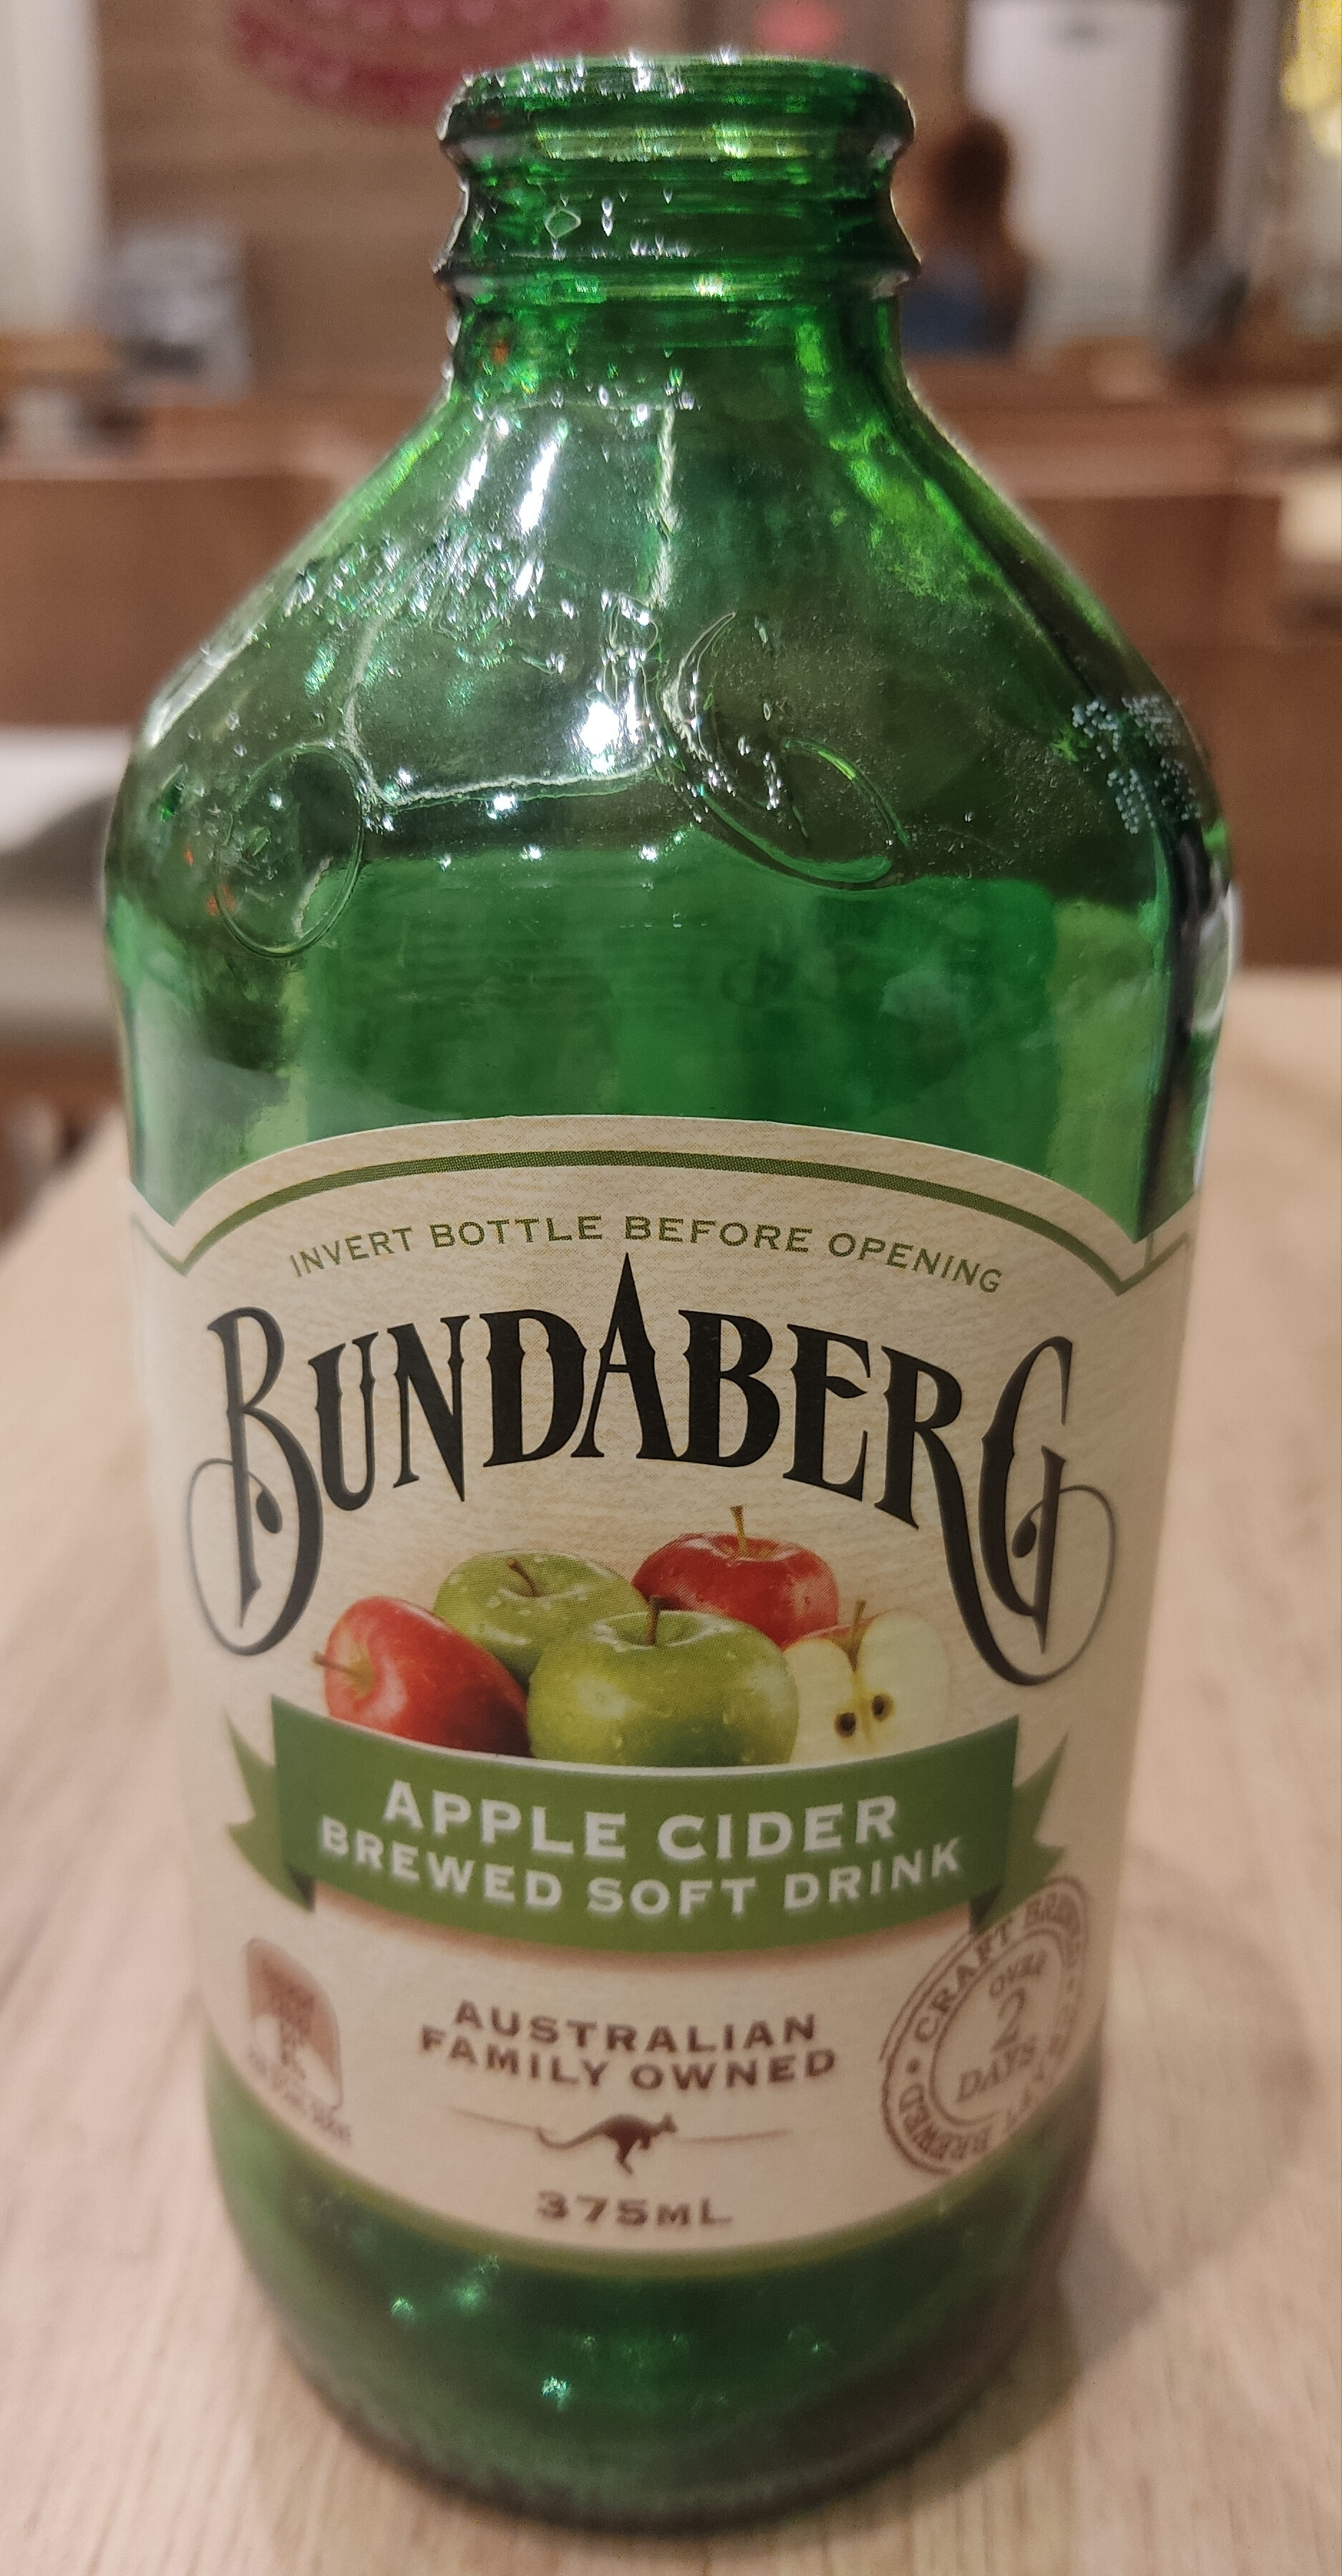 Apple Cider Brewed Softdrink - Recycling instructions and/or packaging information